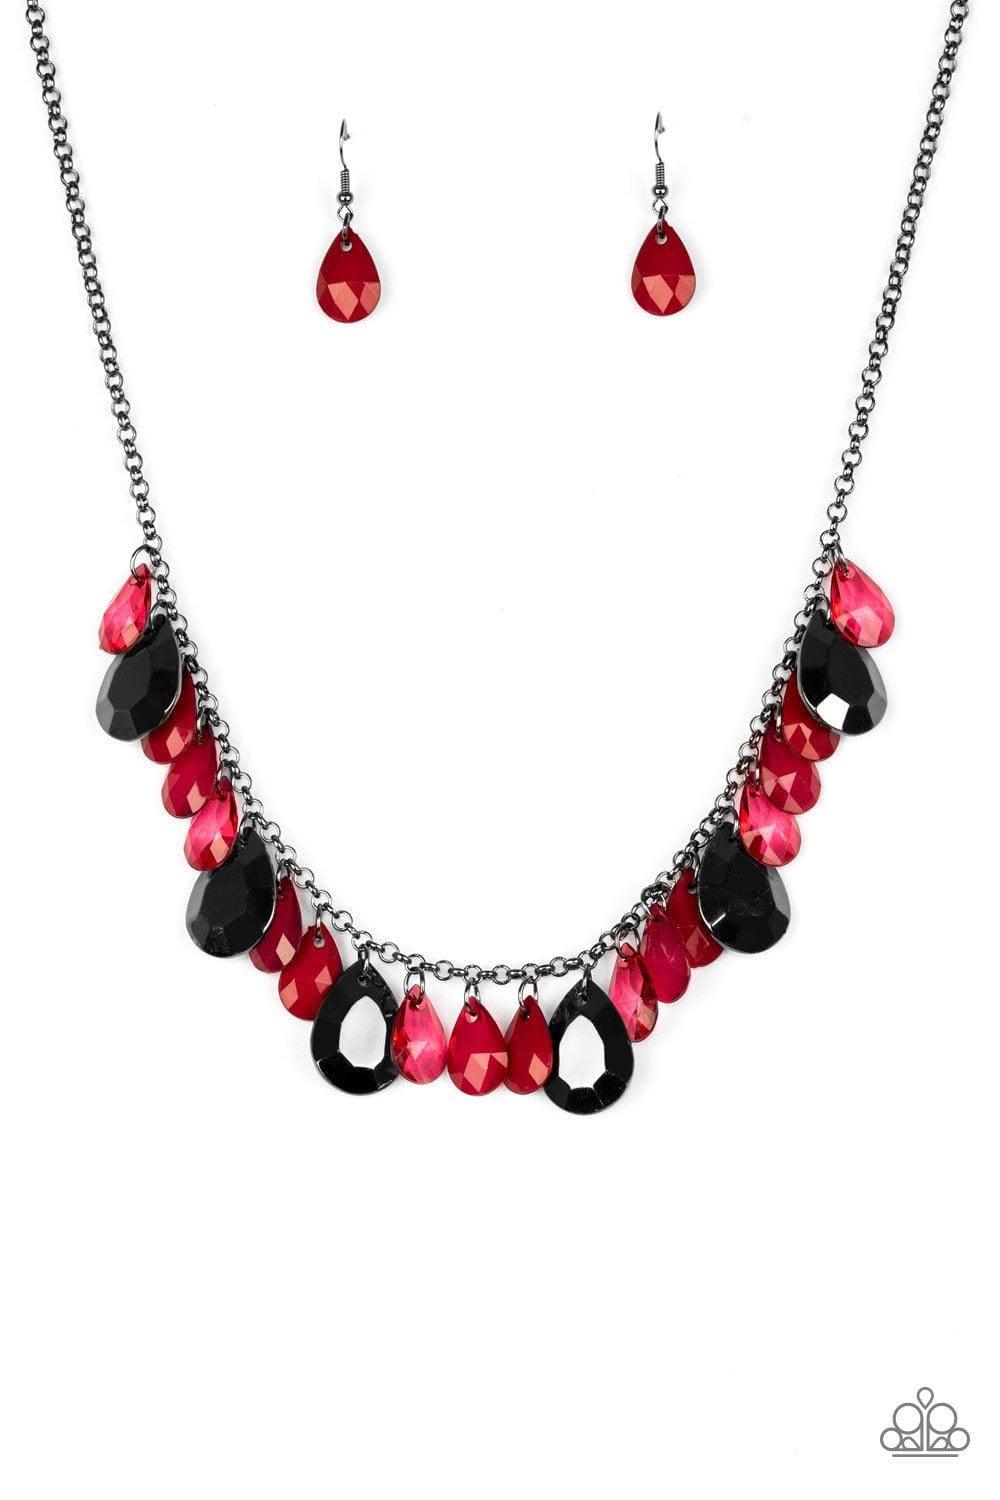 Paparazzi Accessories - Hurricane Season - Red Necklace - Bling by JessieK